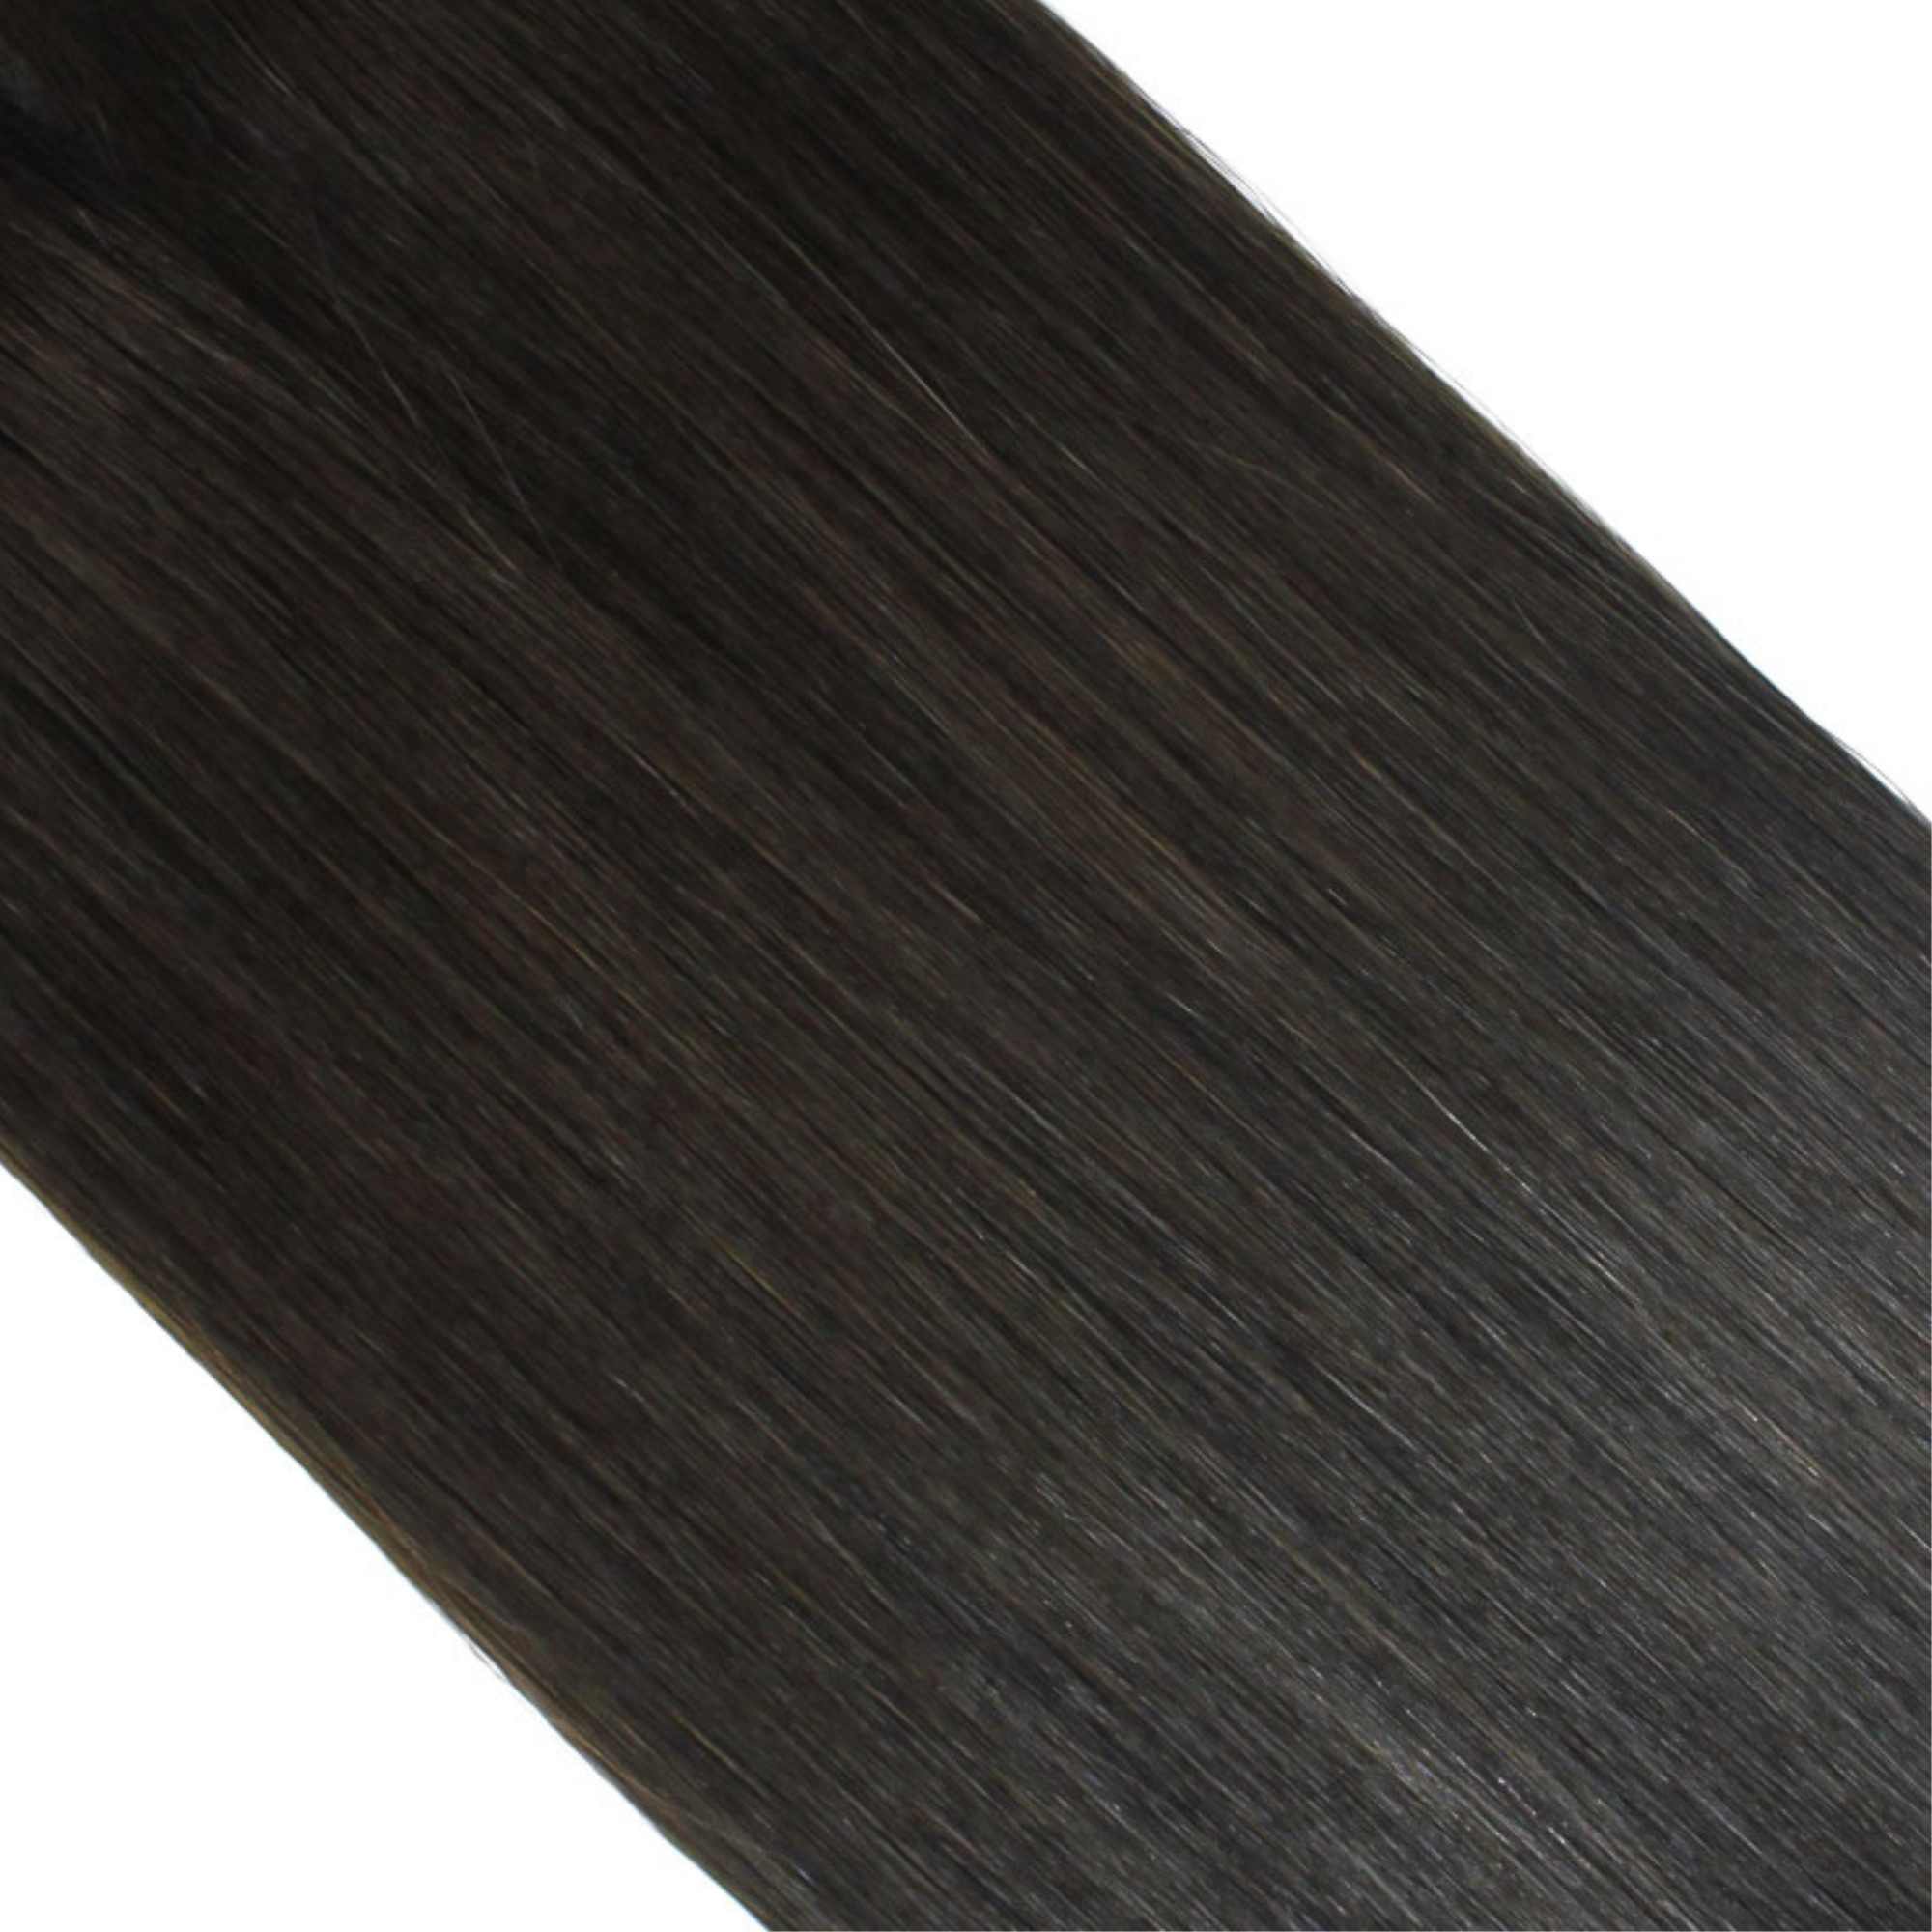 "hair rehab london 22" weft hair extensions shade swatch titled show stopper"